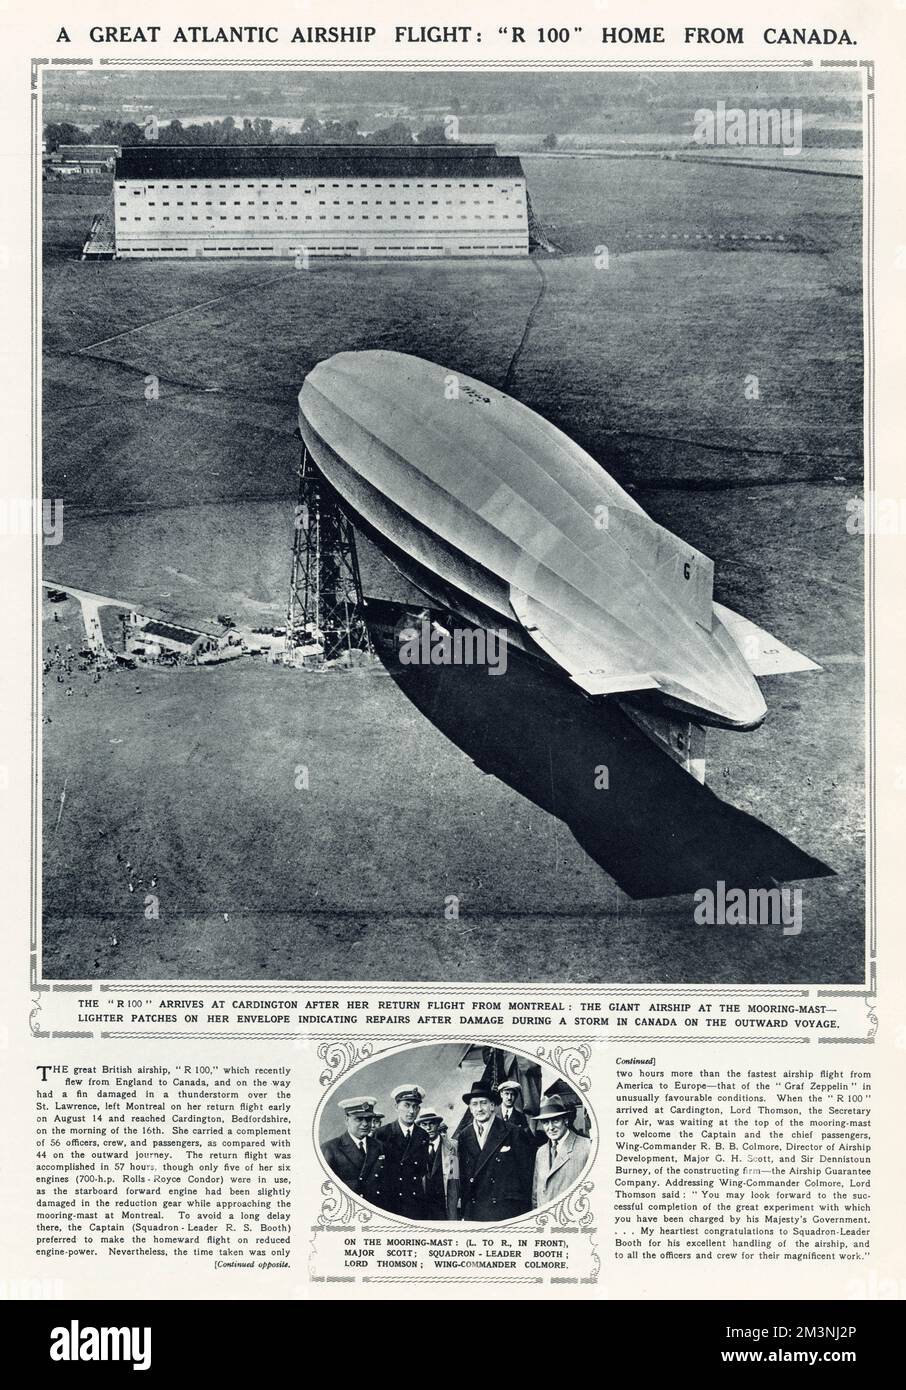 The great British 'R 100' arrived at Cardington after return flight from Montreal, in 78 hours. The damaged fin in a thunderstorm over the St. Lawrence, left Montreal on her return flight early on August 14th and reached Cardington, Bedfordshire on the morning of the 16th. Designed to carry 100 passengers and 37 crew on regularly scheduled mail and passenger flights to Canada, Egypt and India. Stock Photo